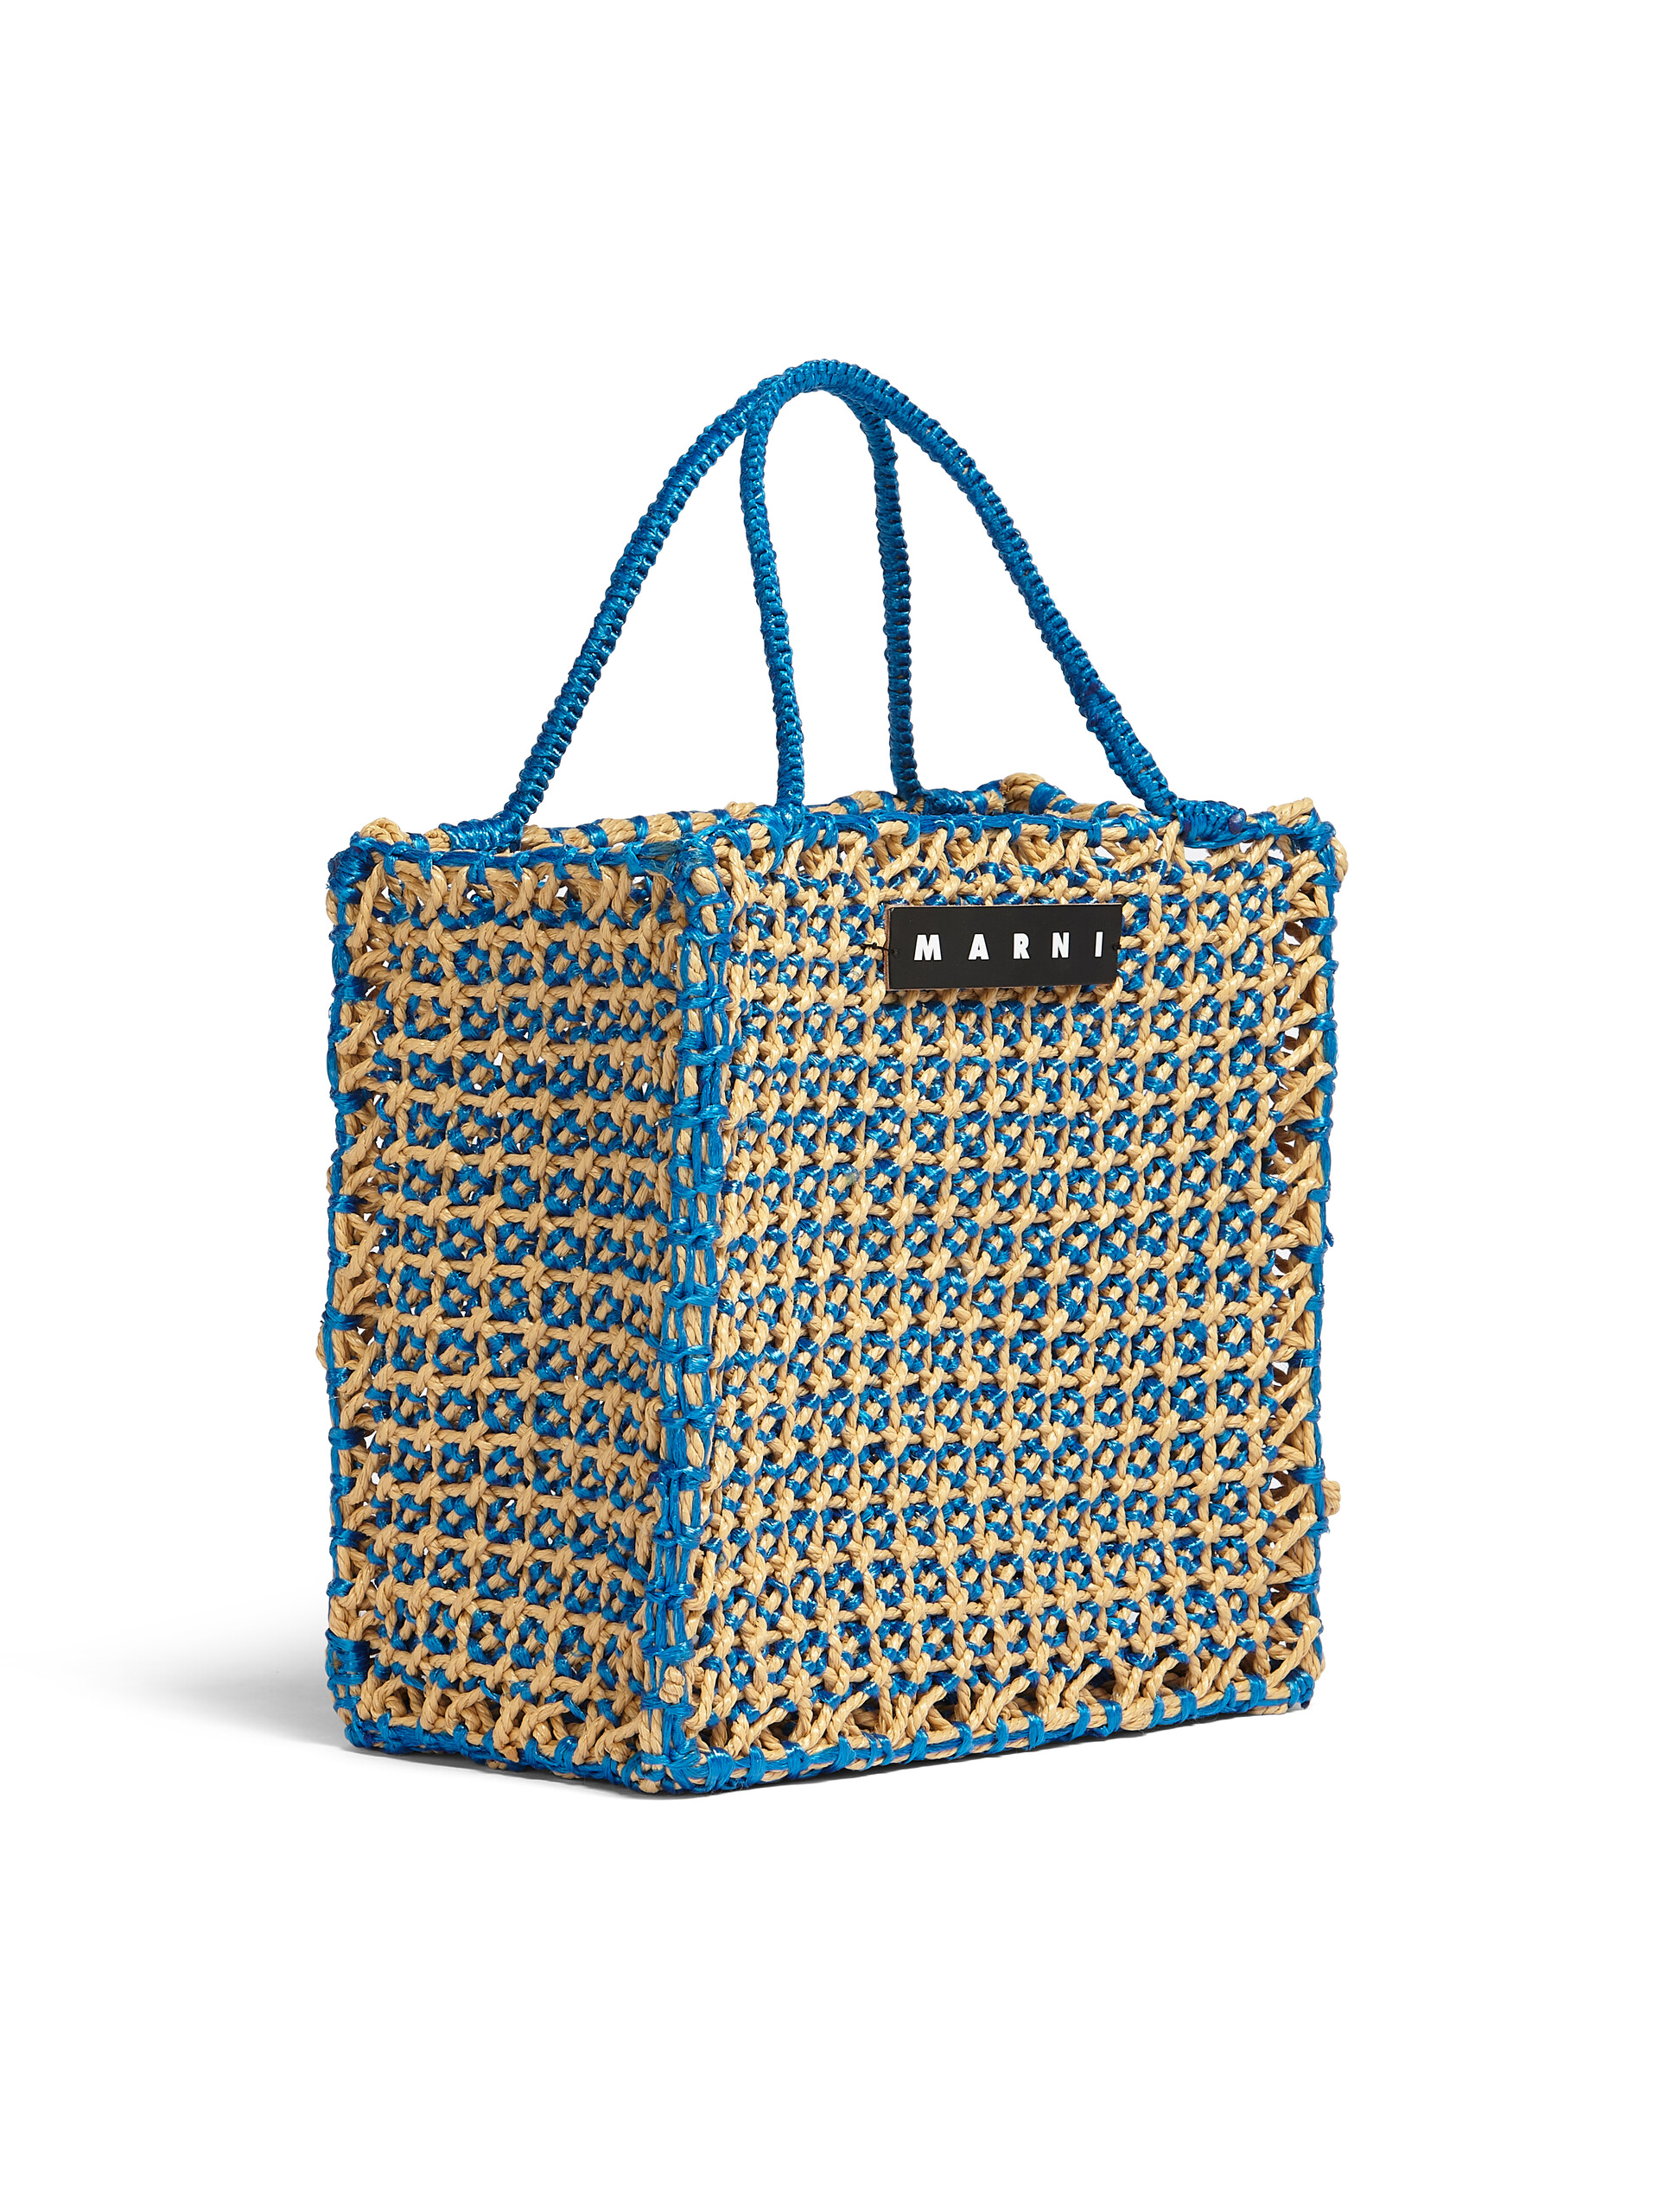 MARNI MARKET large bag in pale blue and beige crochet - Bags - Image 2